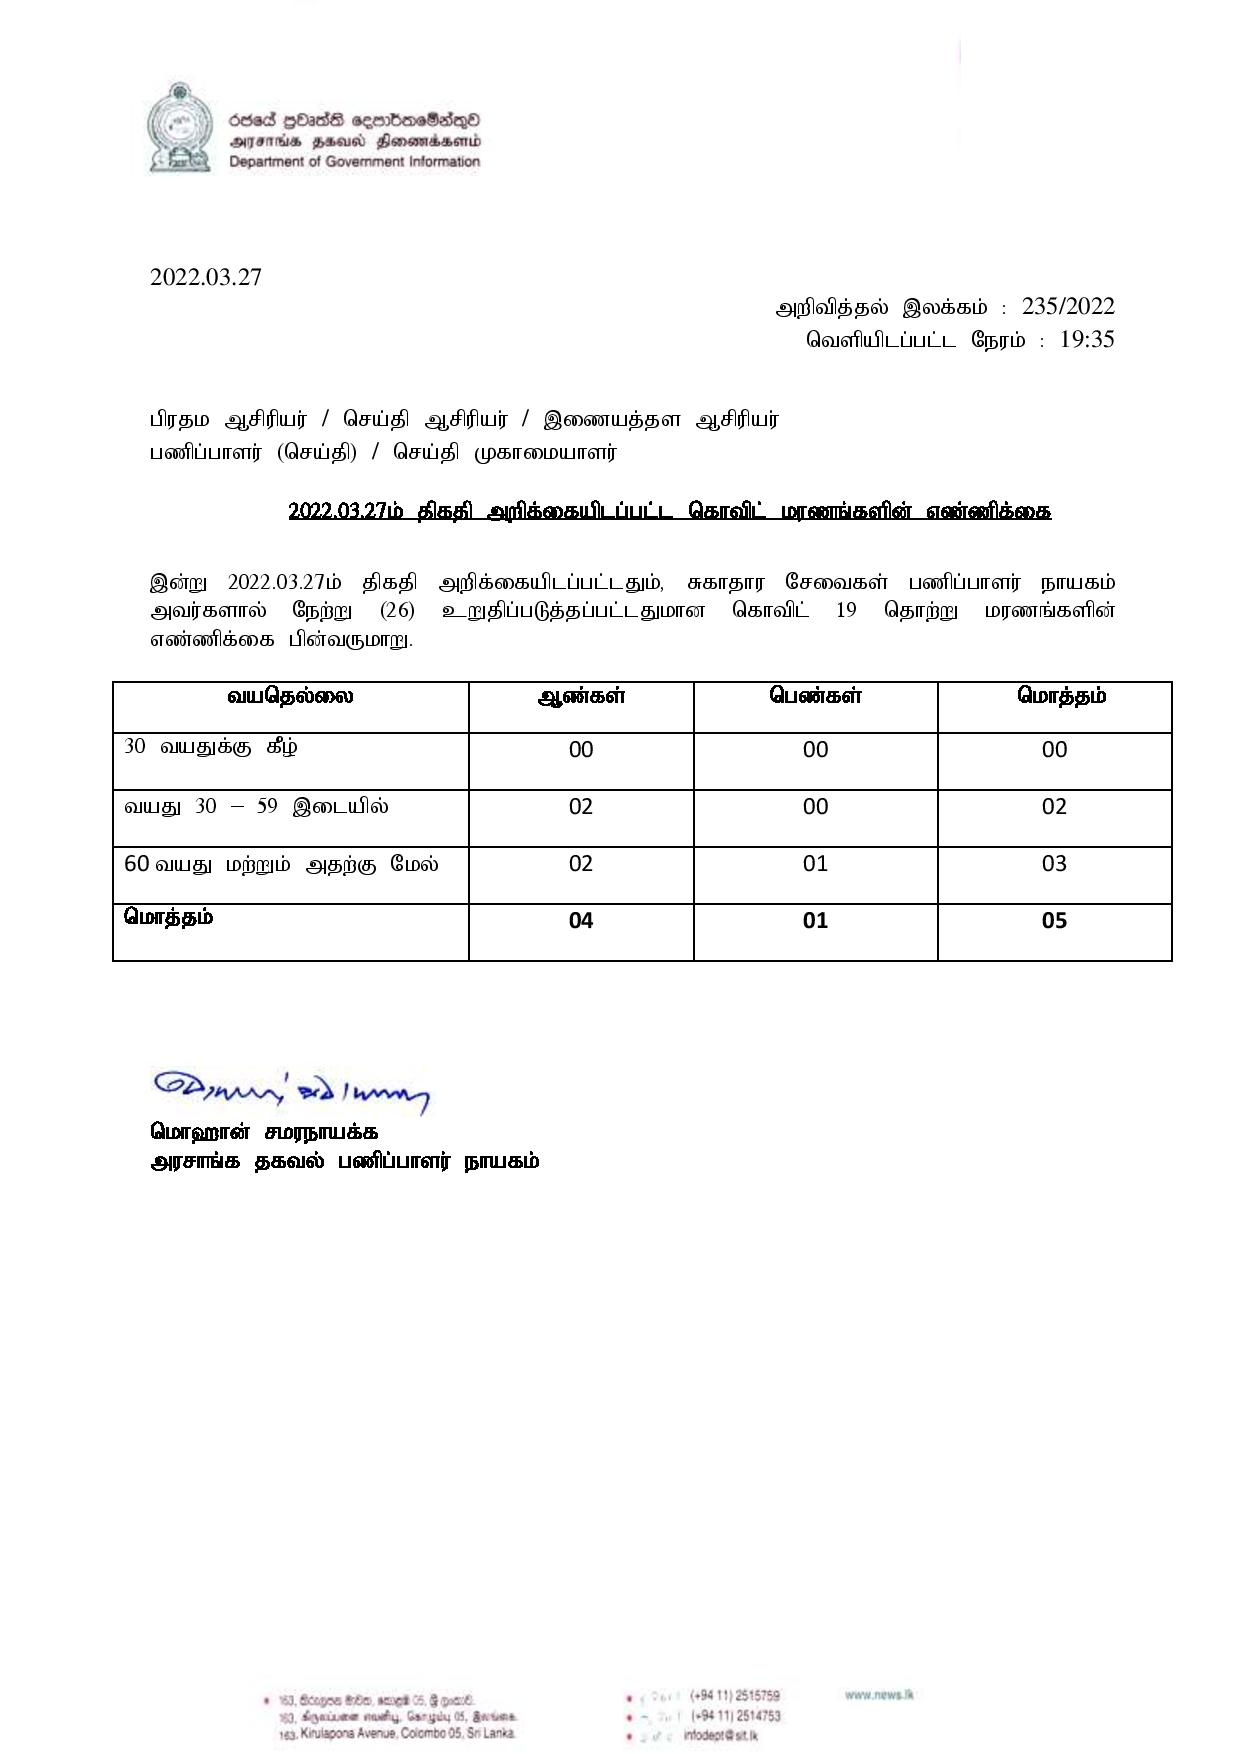 Press Release 235 Tamil page 001